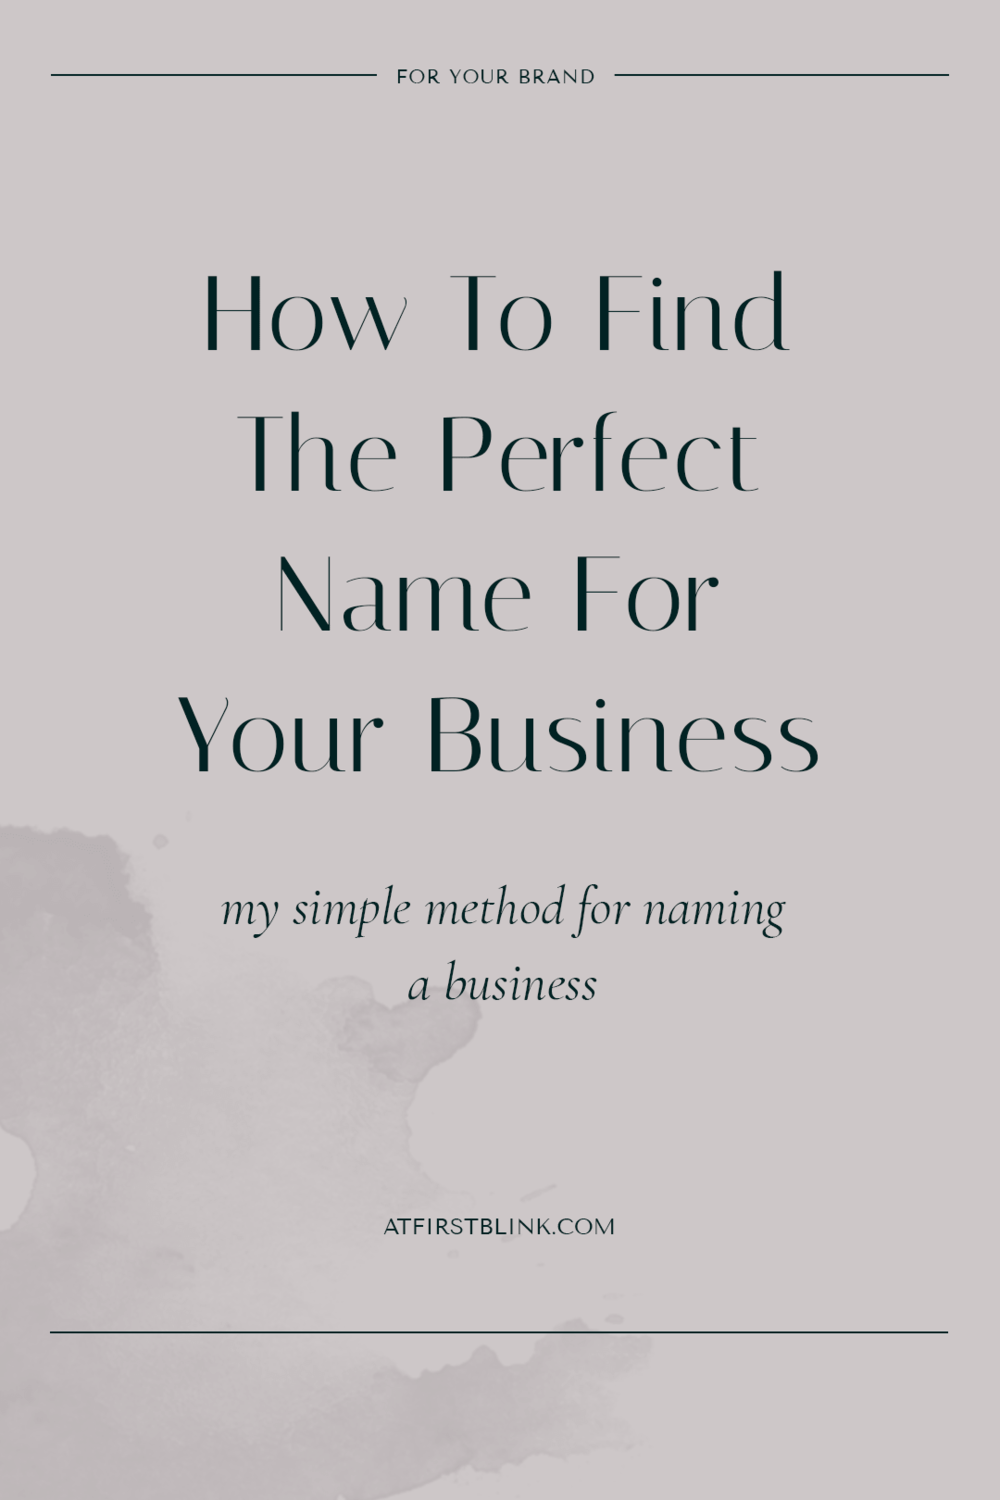 Uitwisseling Voorbeeld Vooruitgaan How to Name Your Brand - A Step by Step Guide to Choosing the Best Business  Name — At First Blink